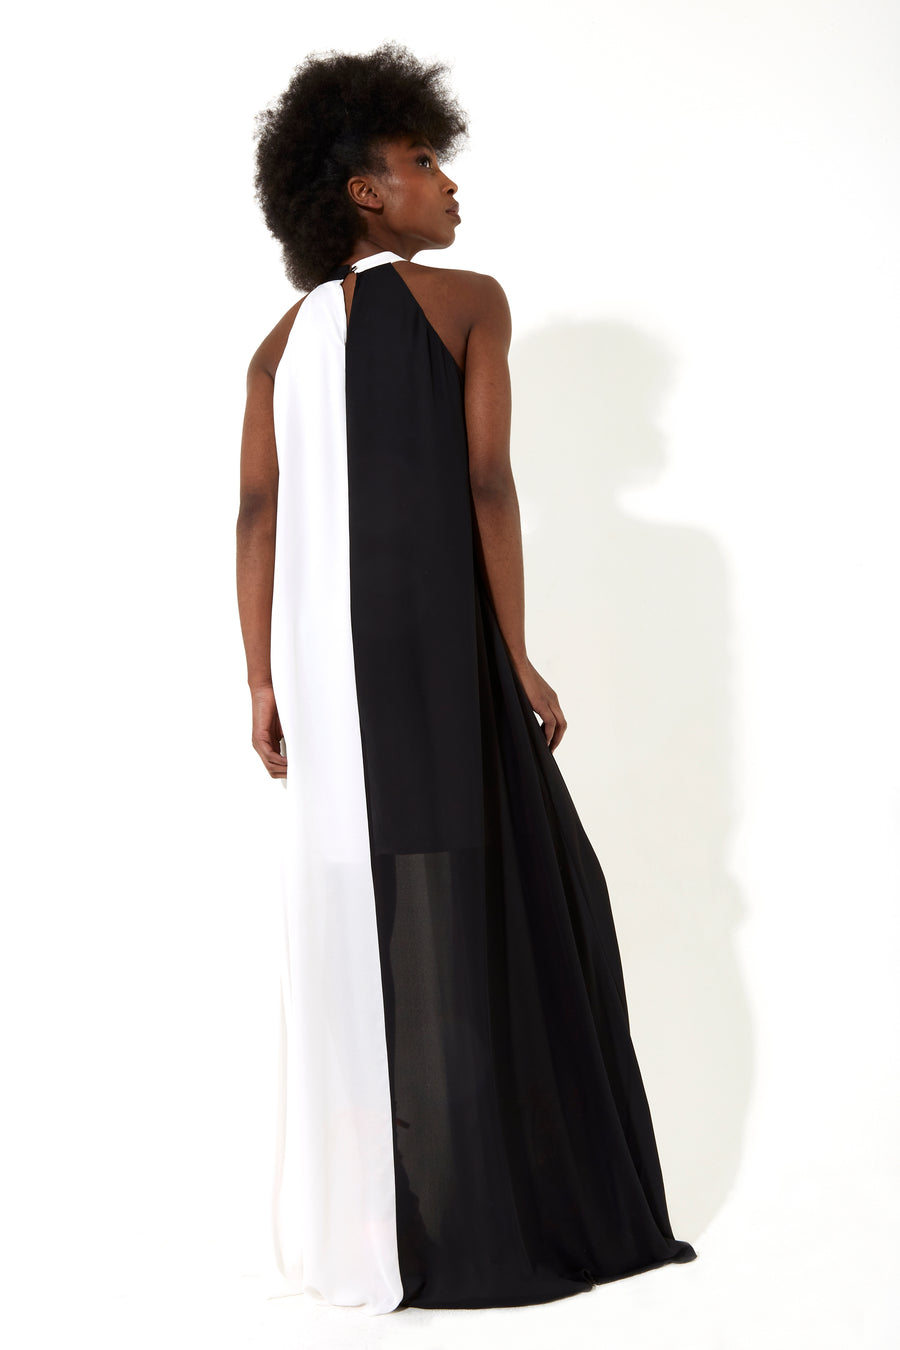 HOUSE OF HOLLAND HALTER NECK SLEEVELESS DRAMATIC MAXI DRESS IN BLACK AND WHITE